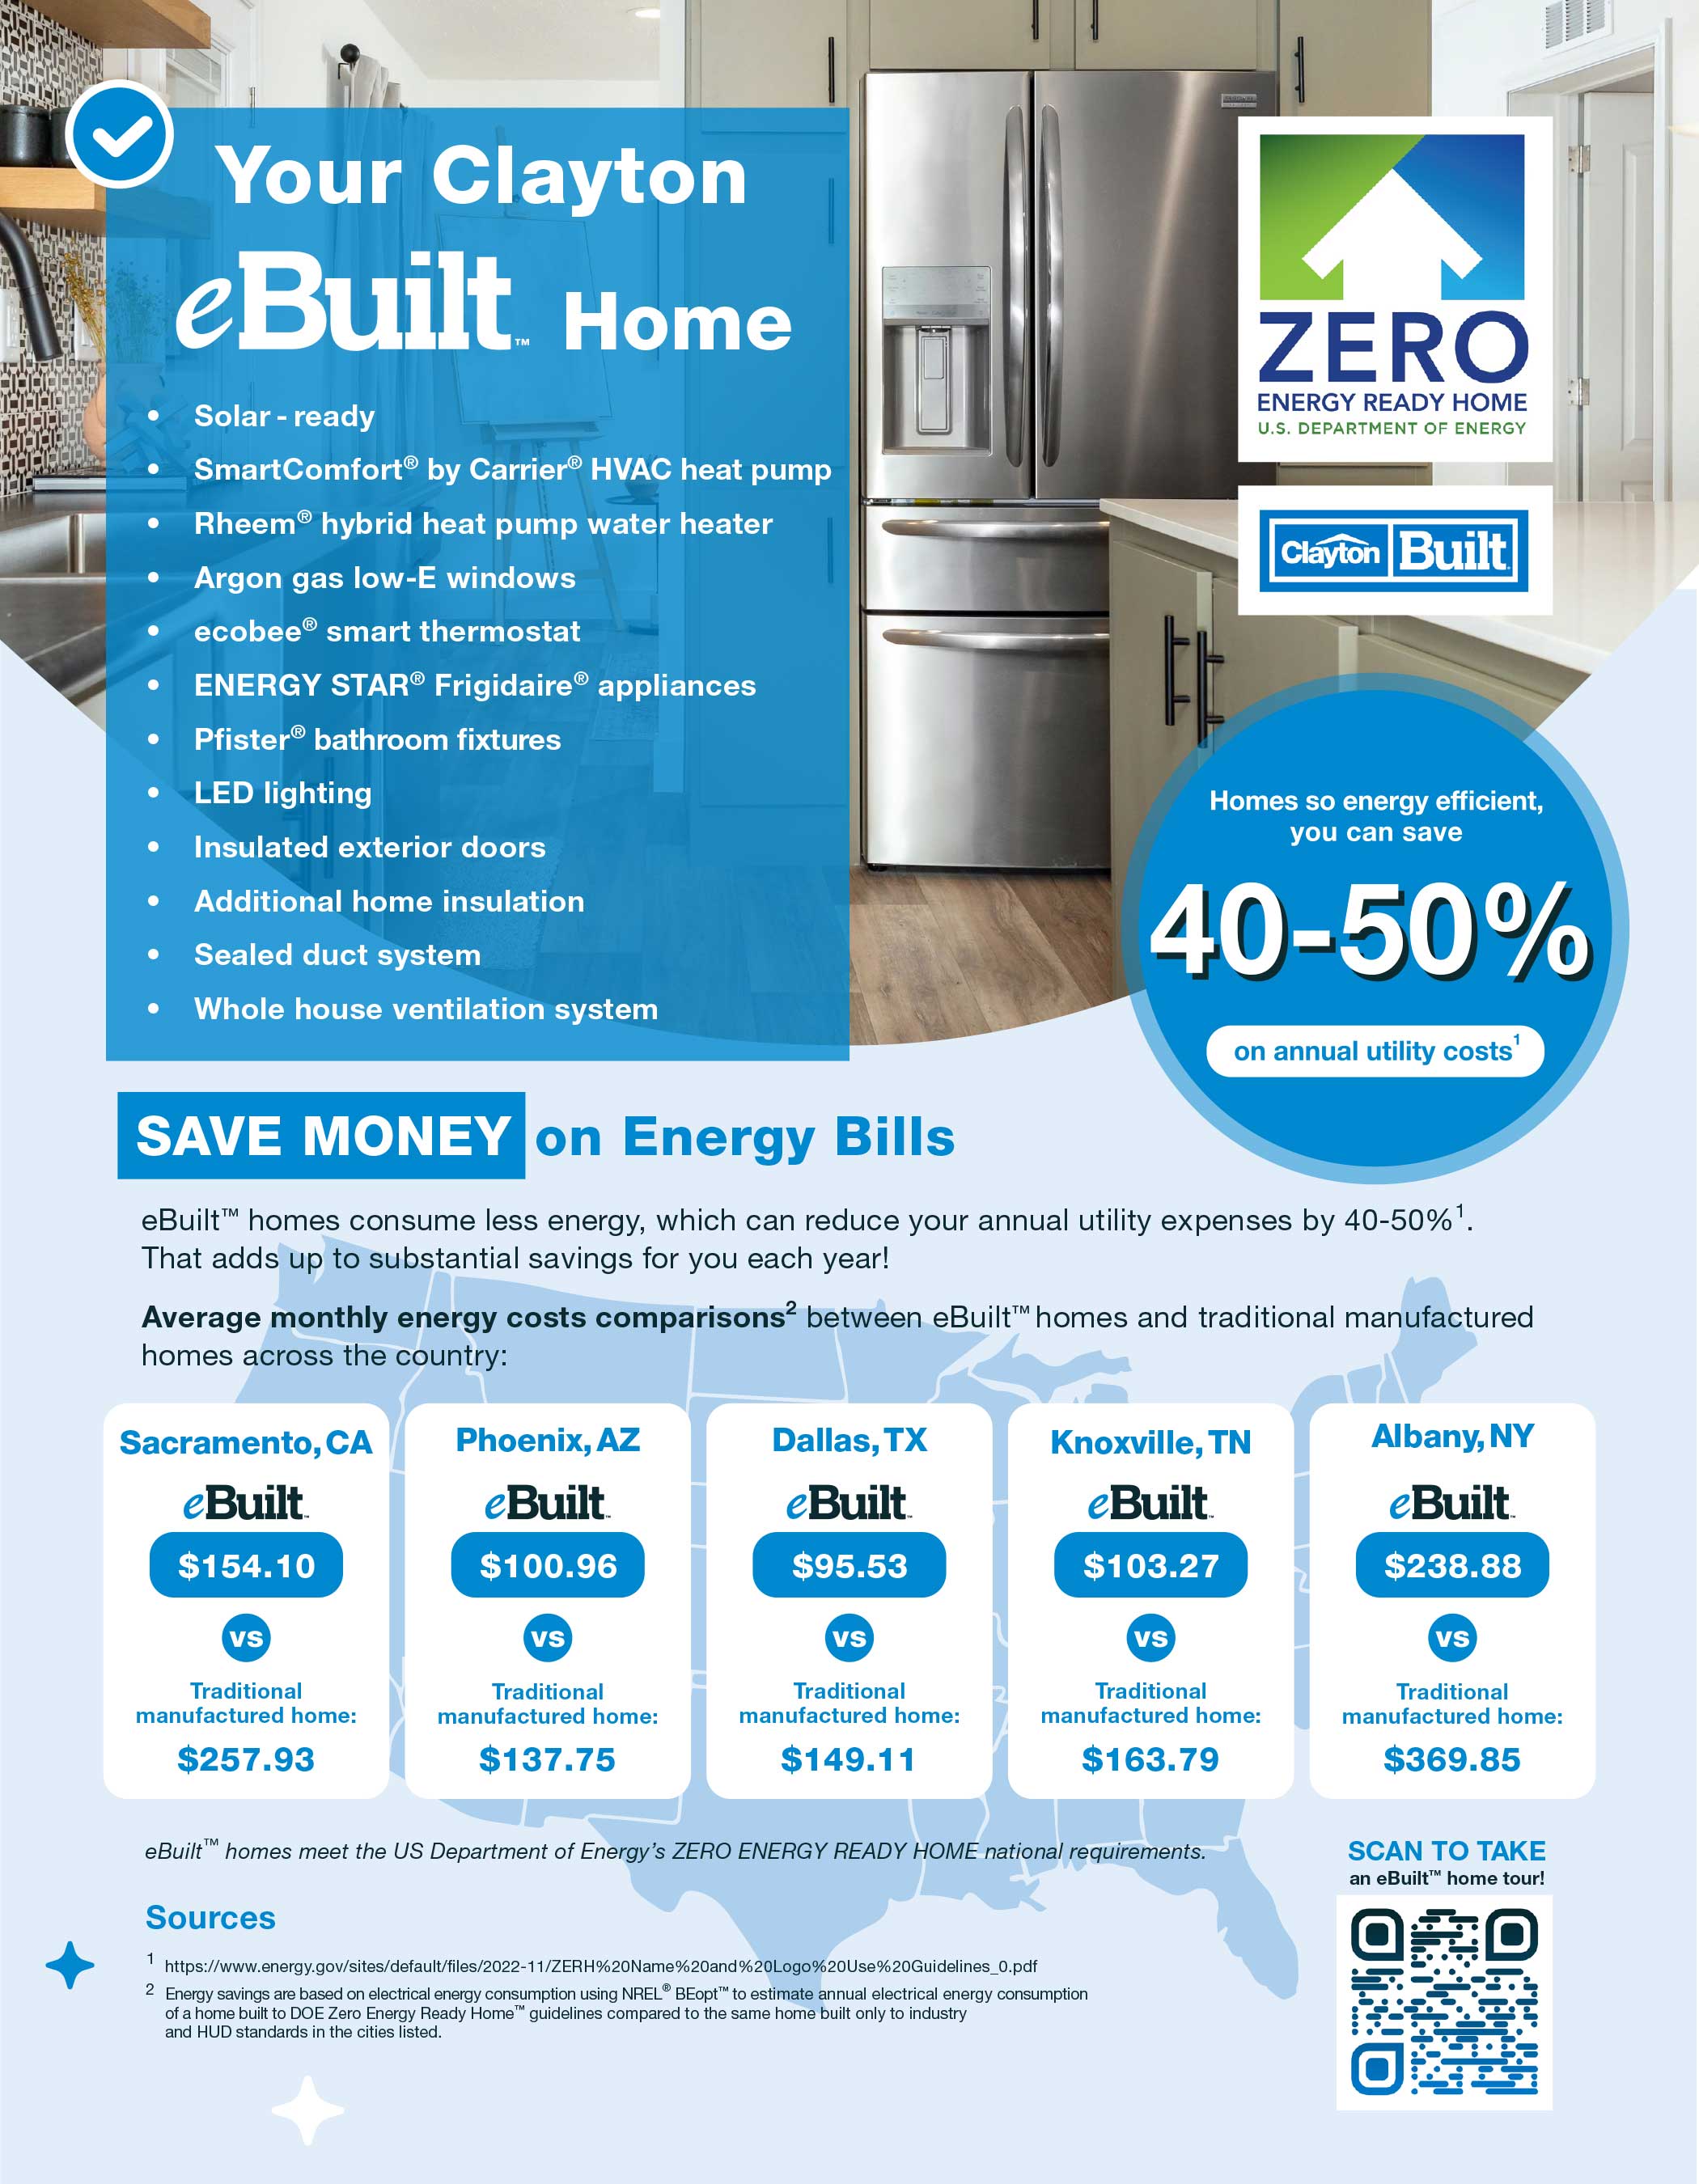 eBuilt homes are built to accommodate a renewable solar energy system if the homeowner chooses to add after purchase for even more savings.